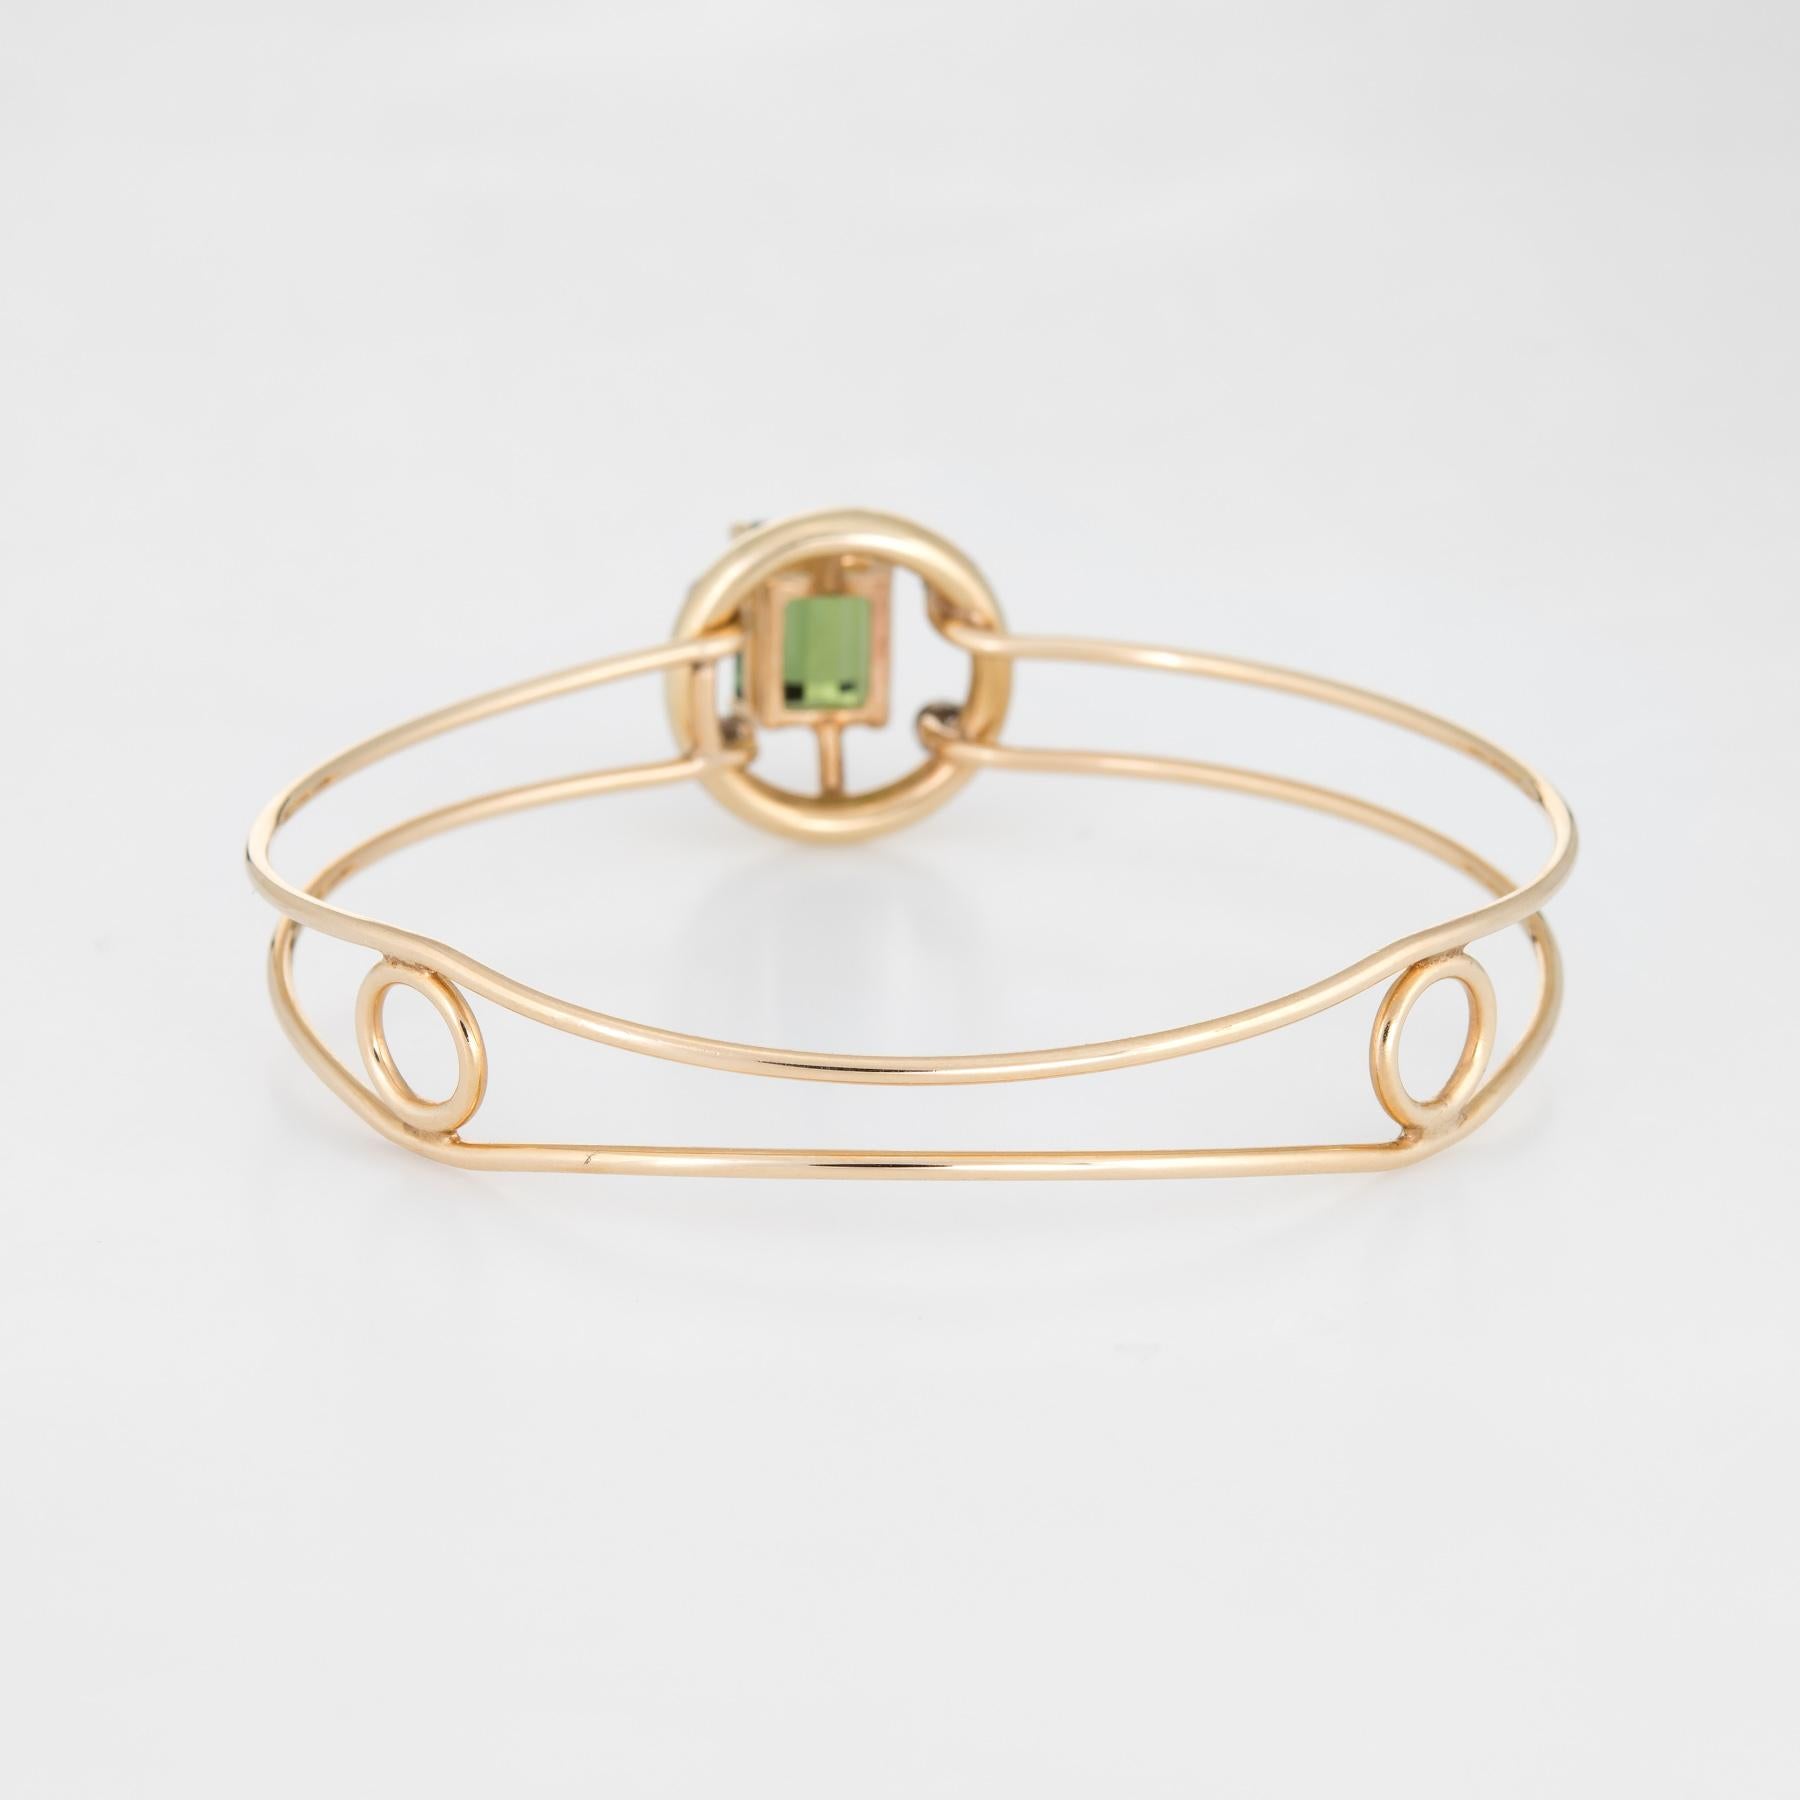 Stylish and finely detailed vintage green tourmaline & diamond bangle bracelet, crafted in 14 karat yellow gold.

Emerald cut green tourmaline measures 10.5mm x 8mm (estimated at 3.70 carats), accented with four round brilliant cut diamonds